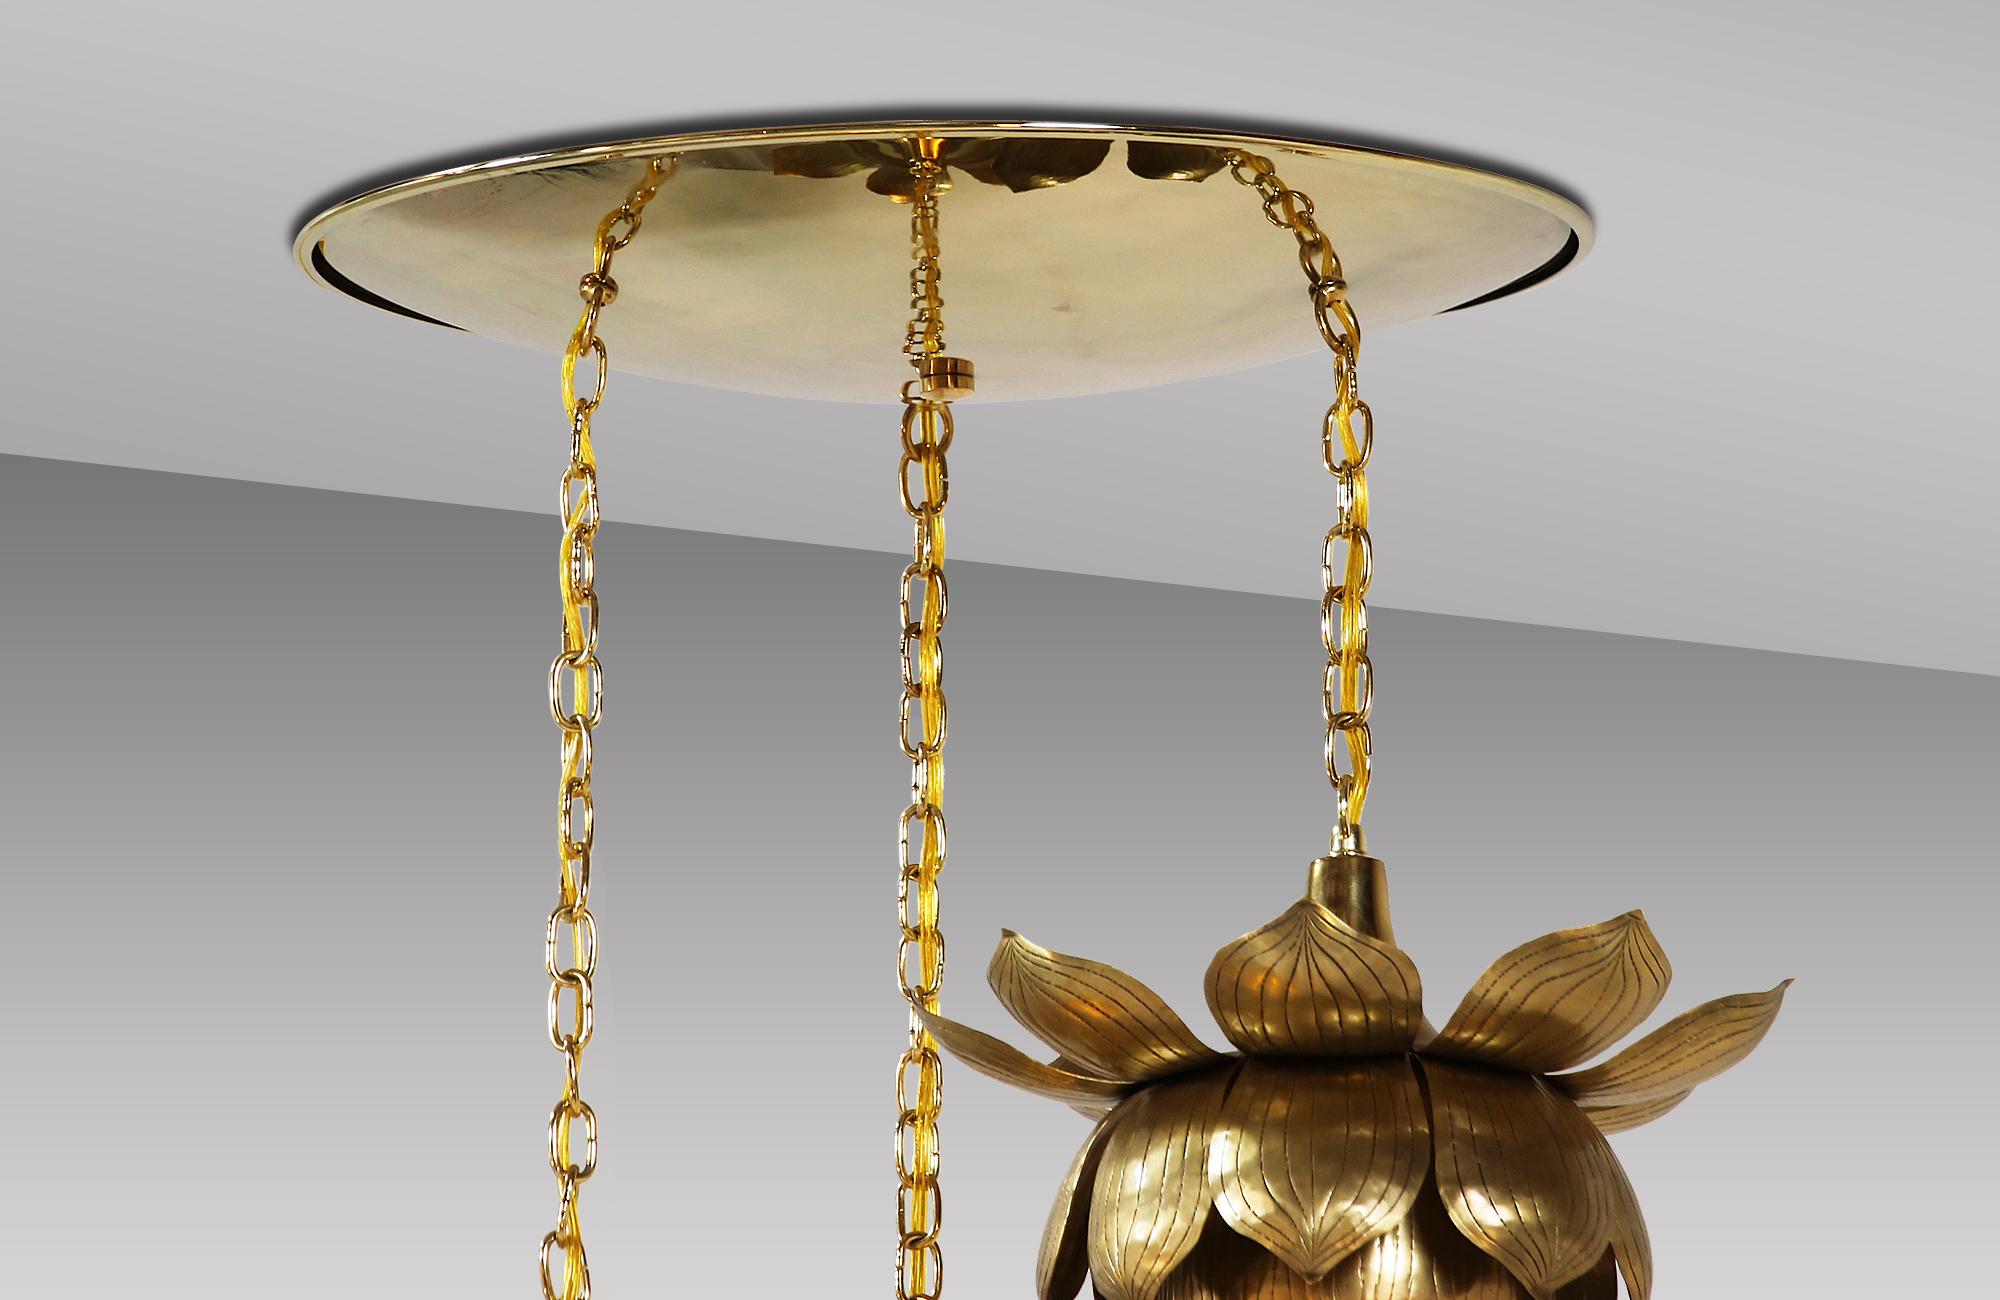 Sculptural lotus chandelier designed and manufactured by Feldman Lighting Co. in the United States, circa 1960s. This stunning flower pendant features three polished brass lotus flowers with a delicate patina hanging from chains attached to a